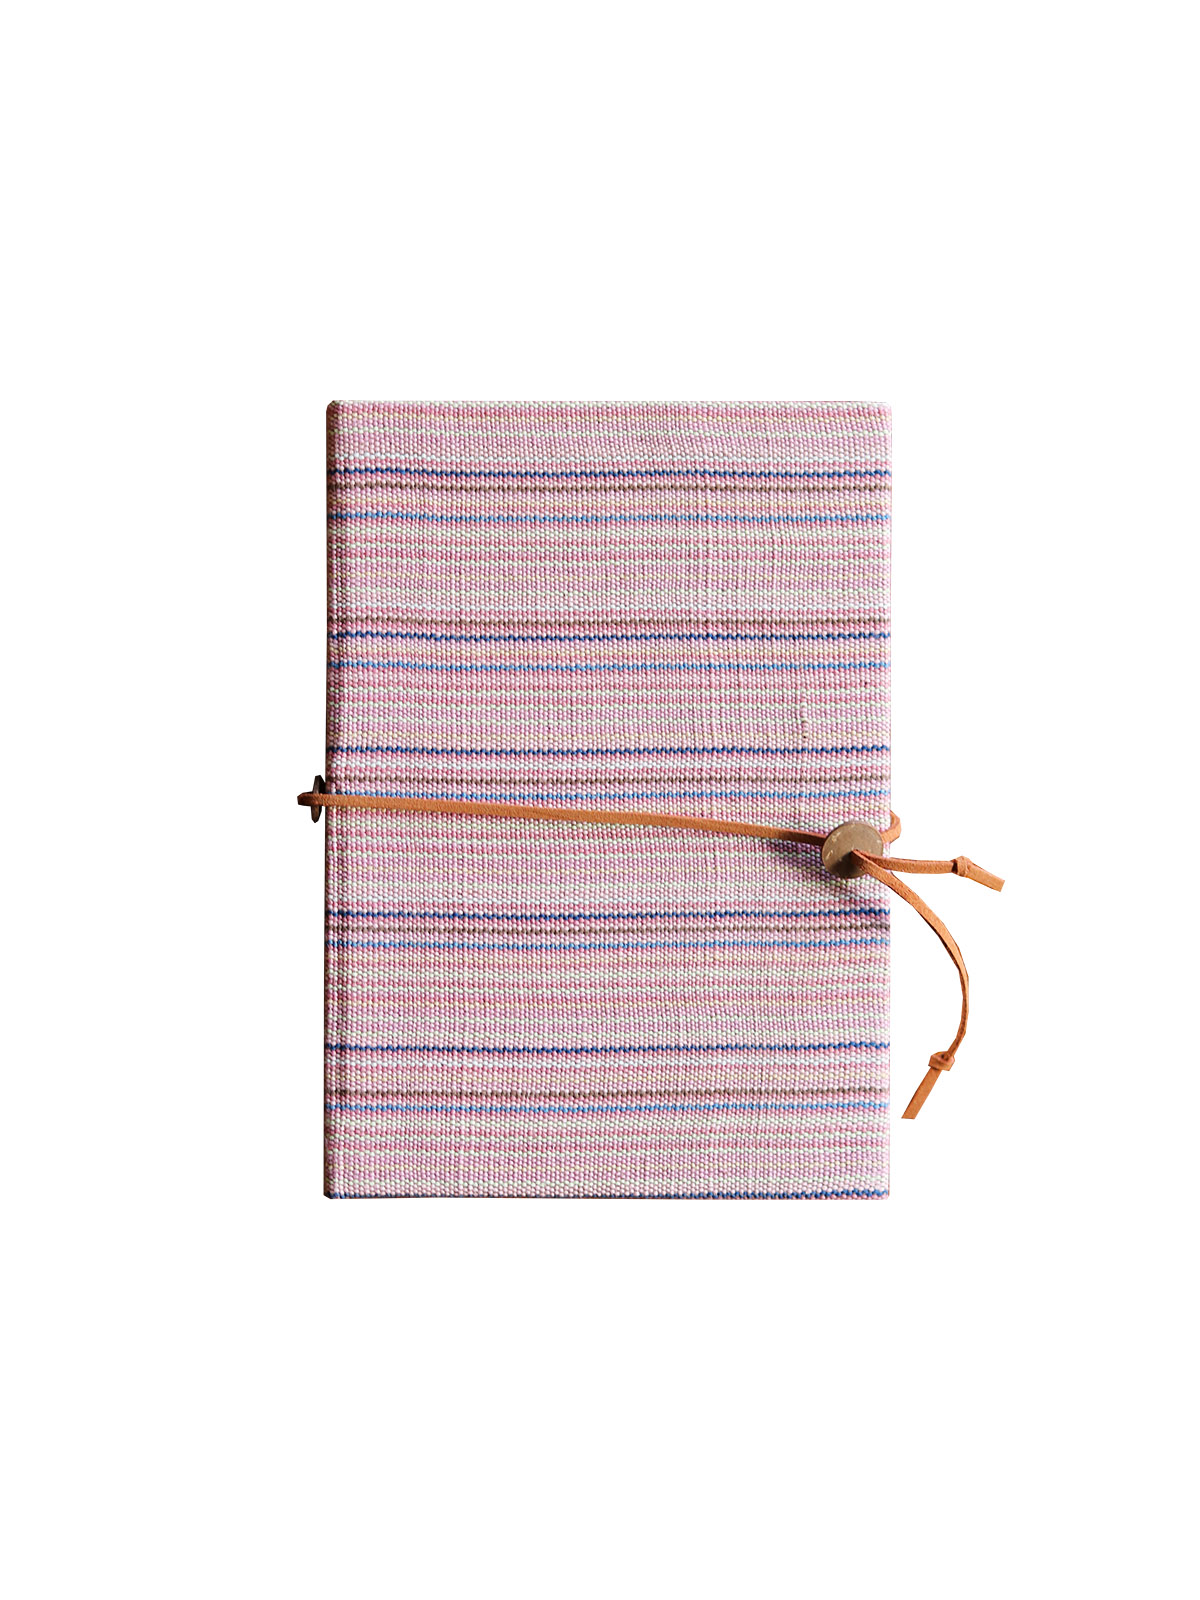 Pink Handcrafted Notebook with Handwoven Cotton Cover and Leather Strap - Mitzie Mee Shop